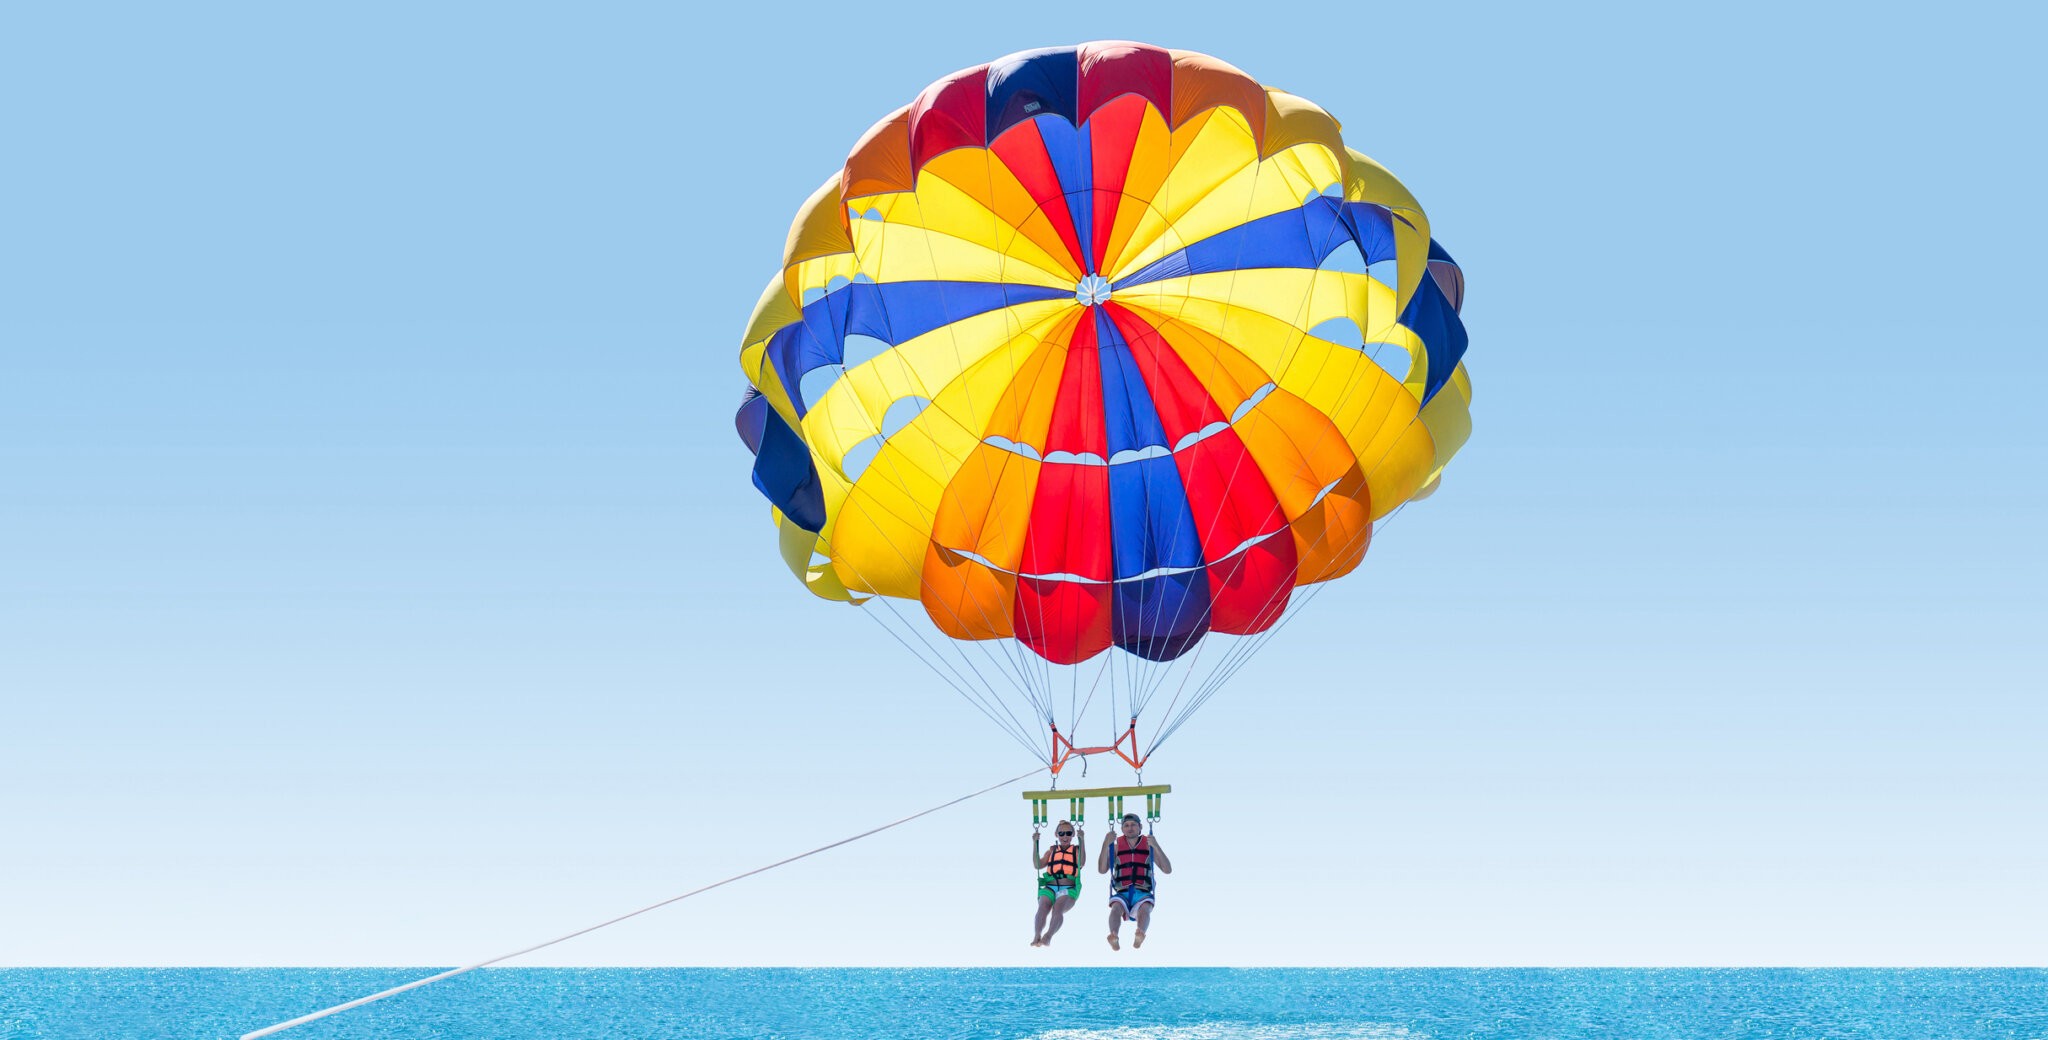 Go parasailing together for Valentine's Day in Palm Beach